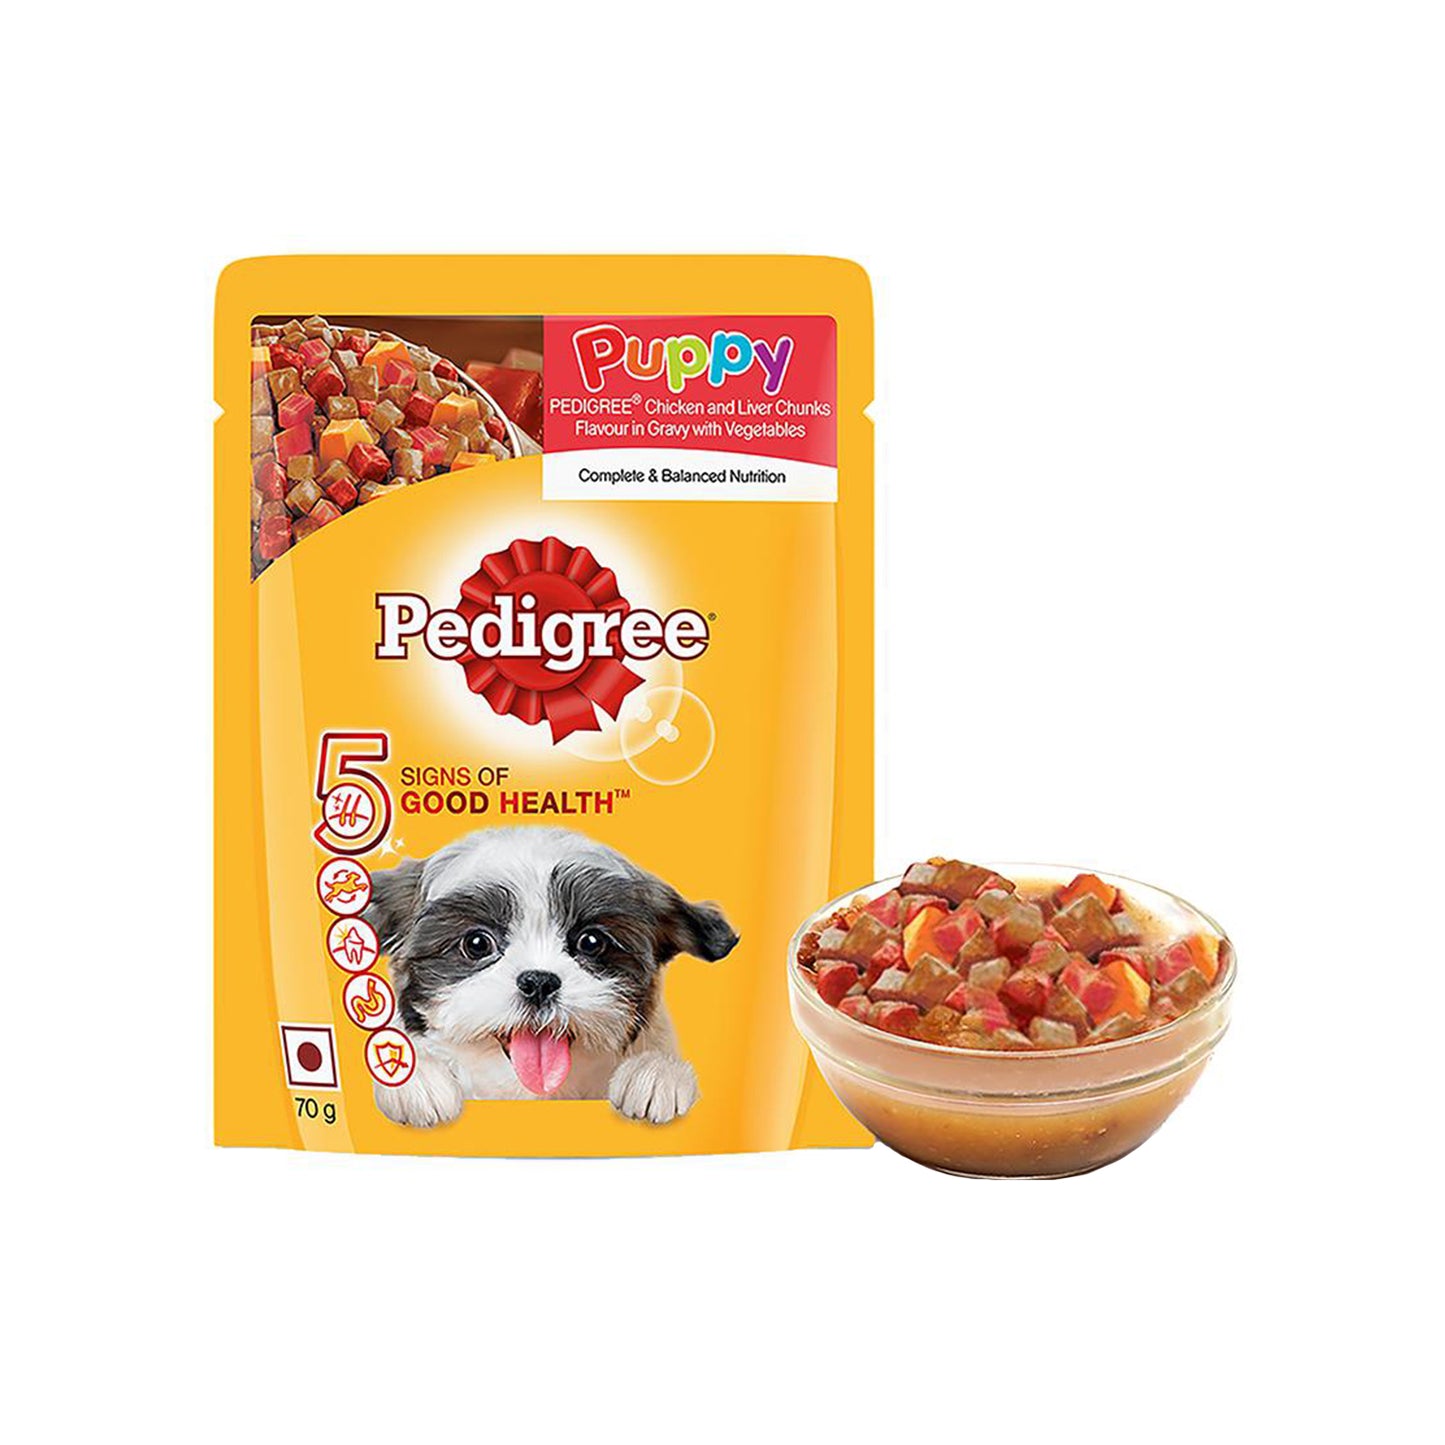 Pedigree - Puppy Wet Dog Food | Chicken And Liver Chunks Flavour in Gravy with Vegetables